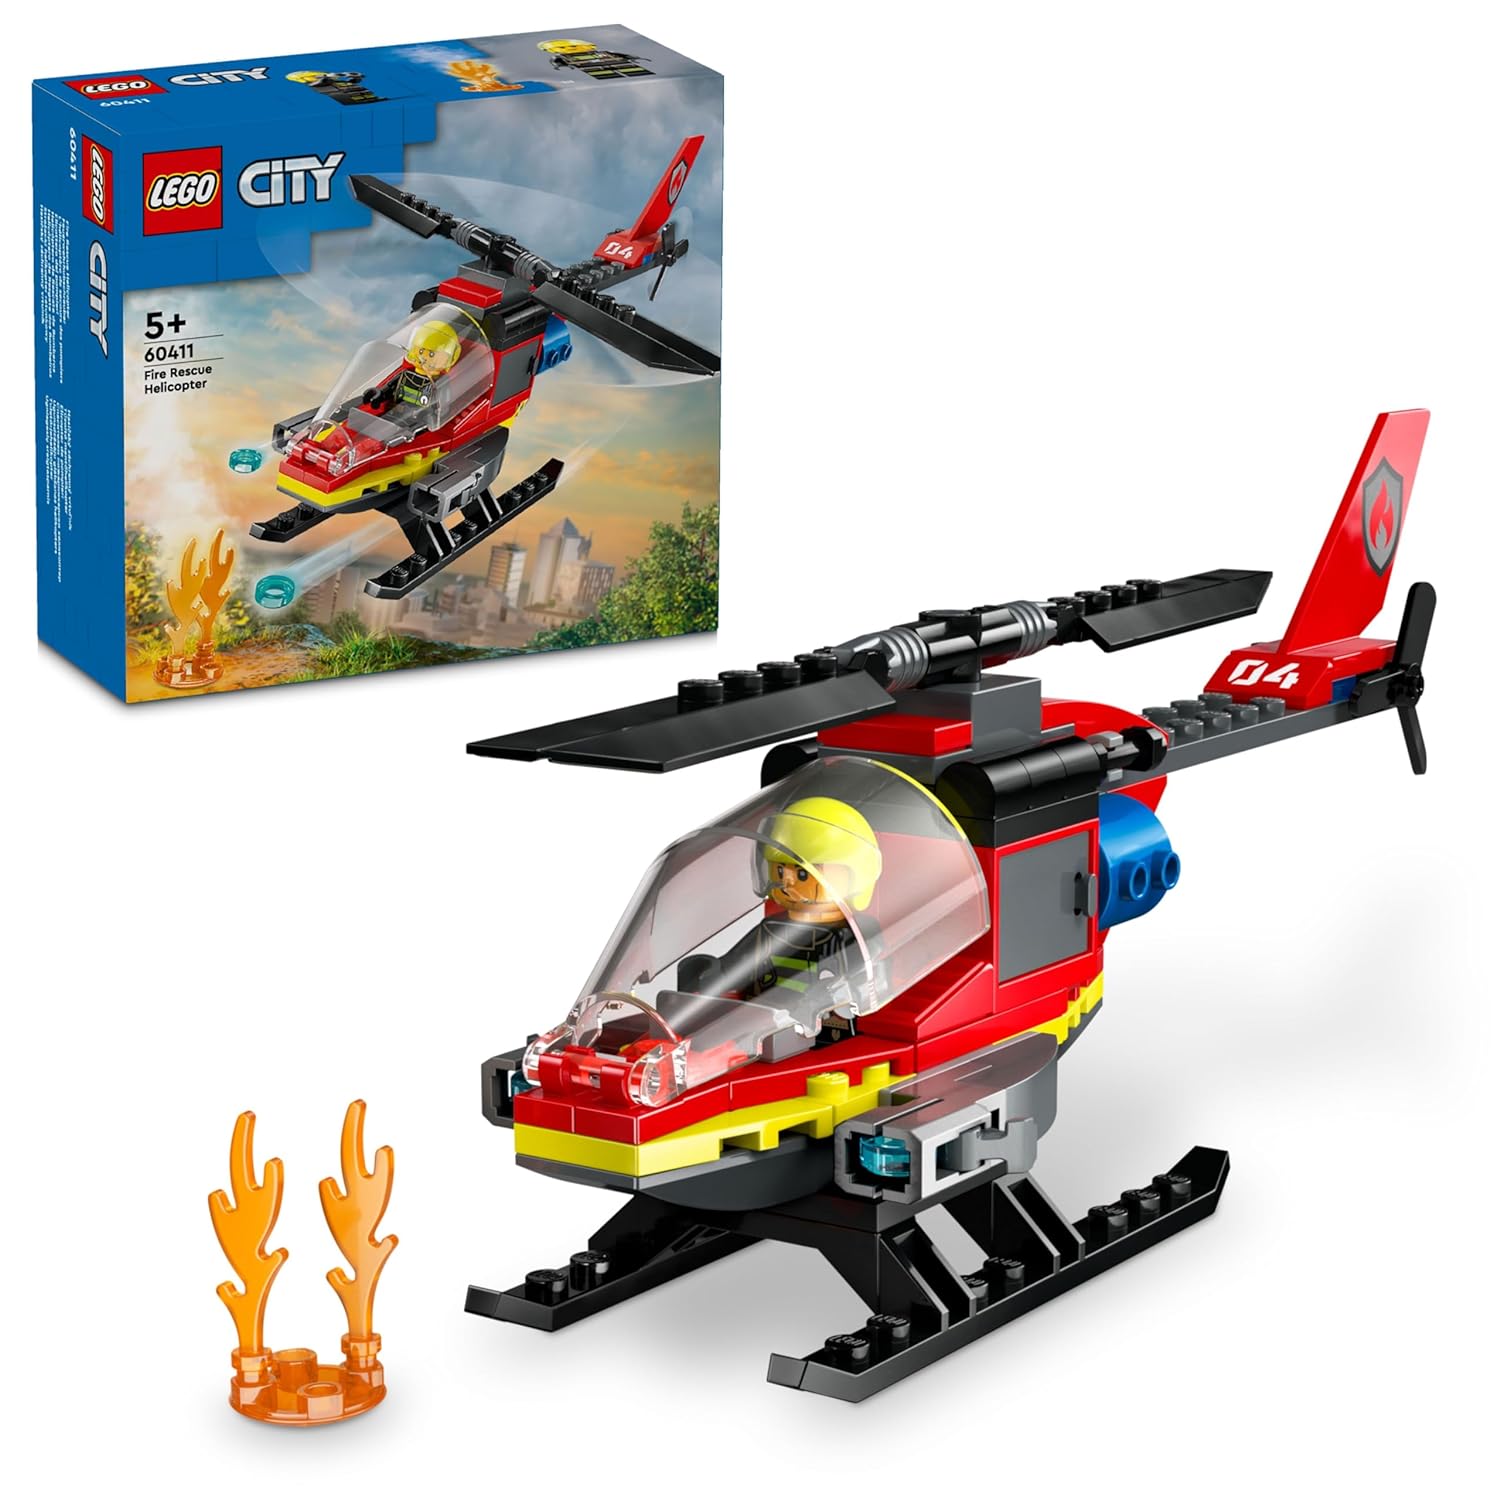 LEGO City Fire Rescue Helicopter Building Kit for Ages 5+